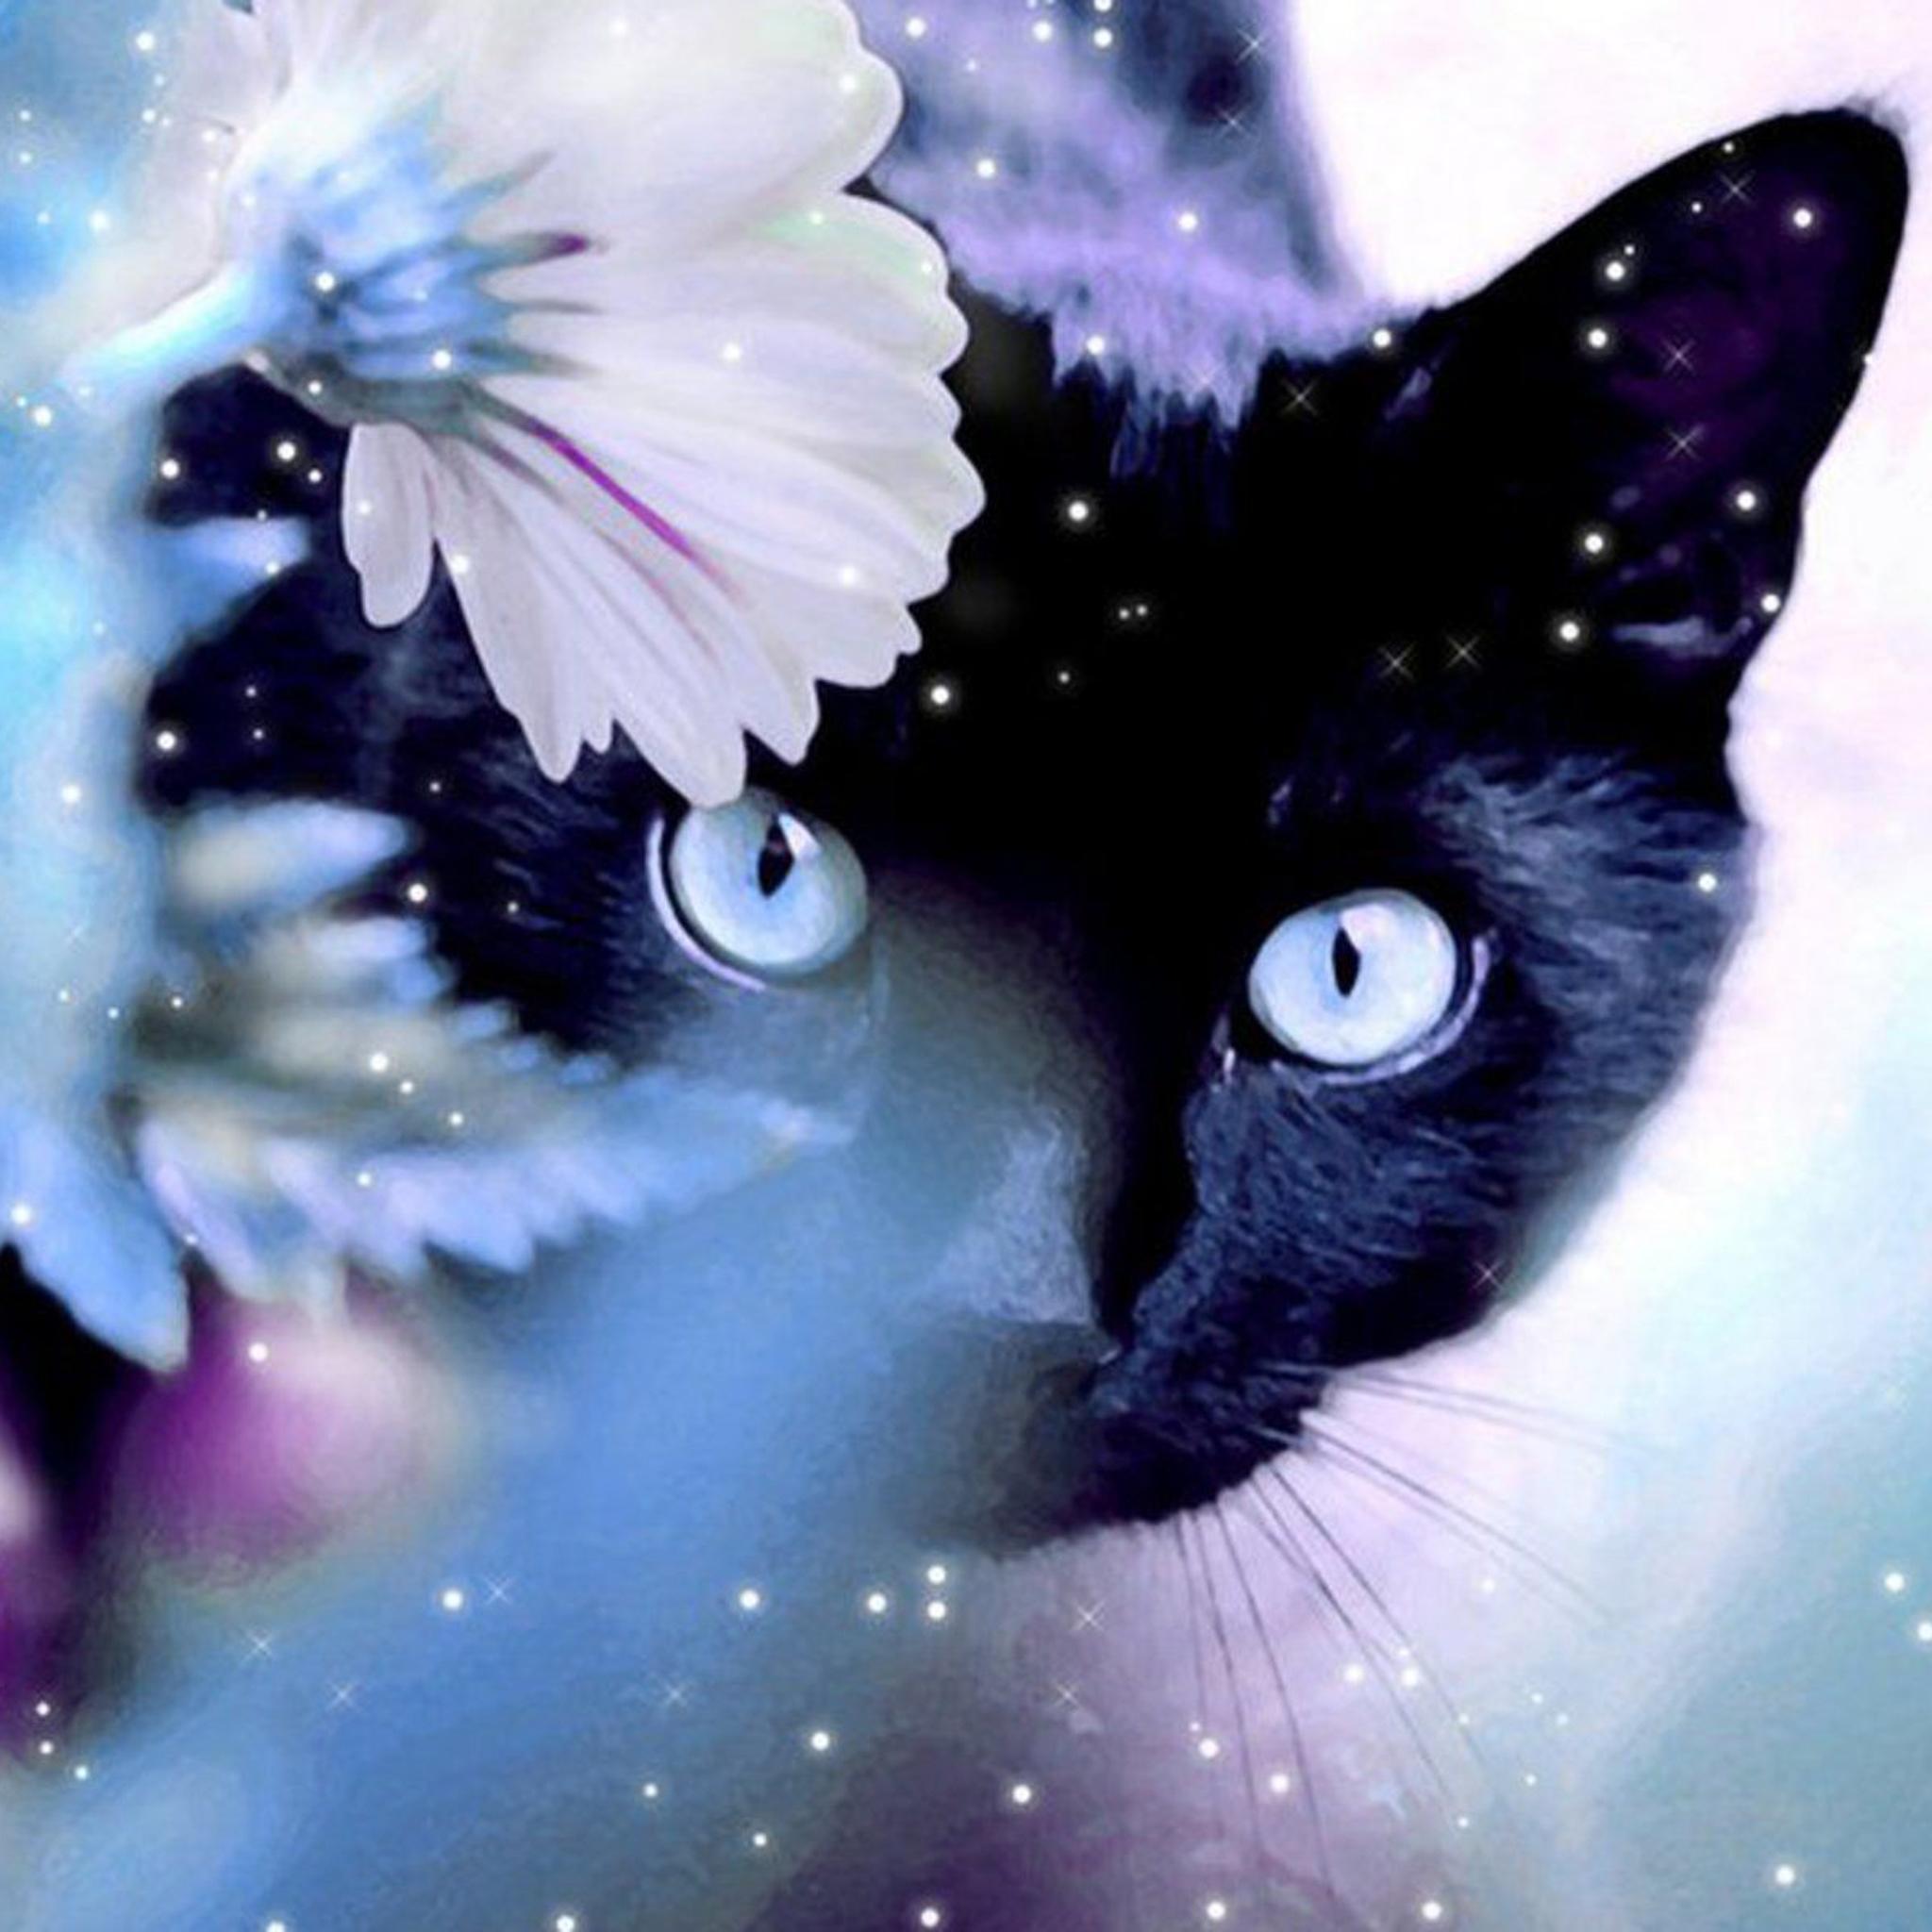 Cats And Flowers Wallpapers - Wallpaper Cave